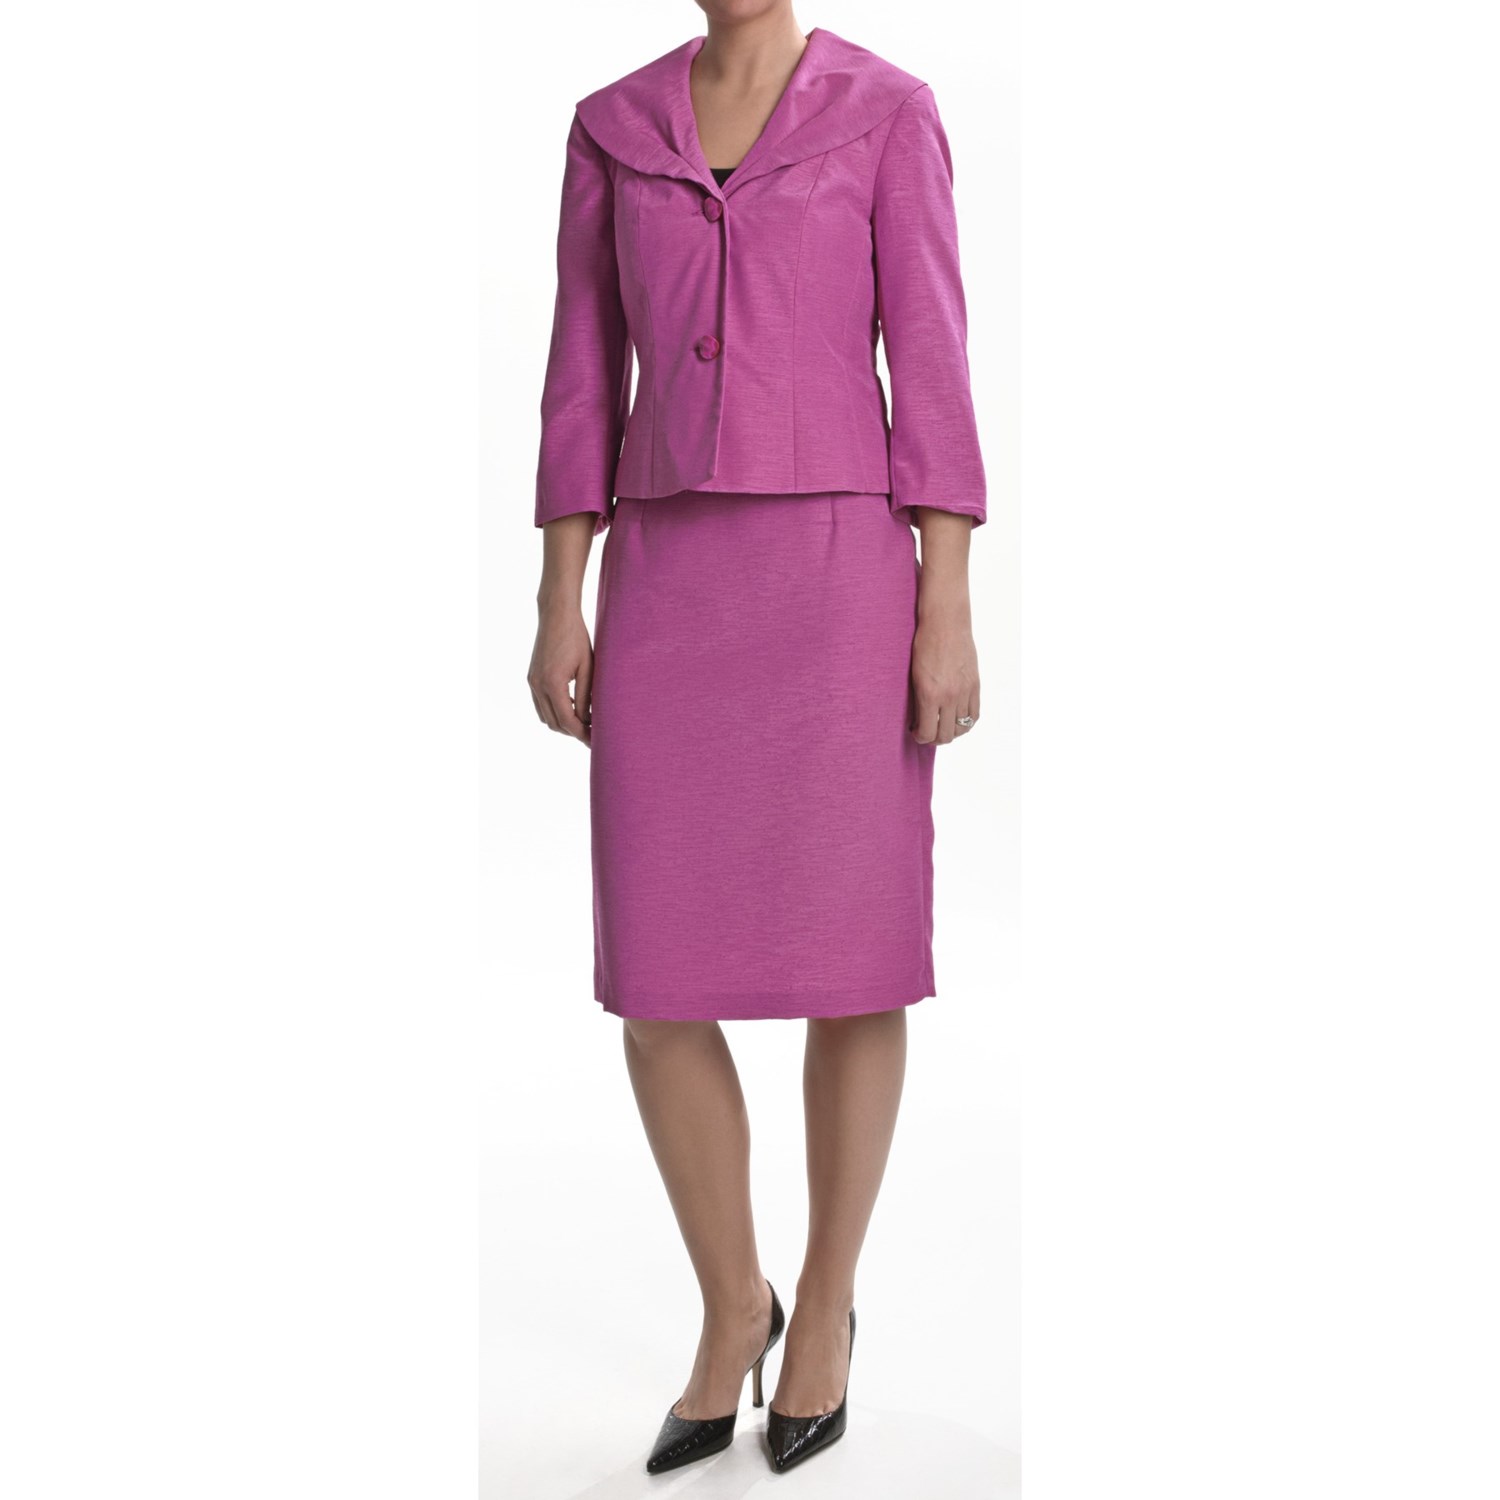 Isabella Skirted Suit (For Women) 4513C - Save 70%